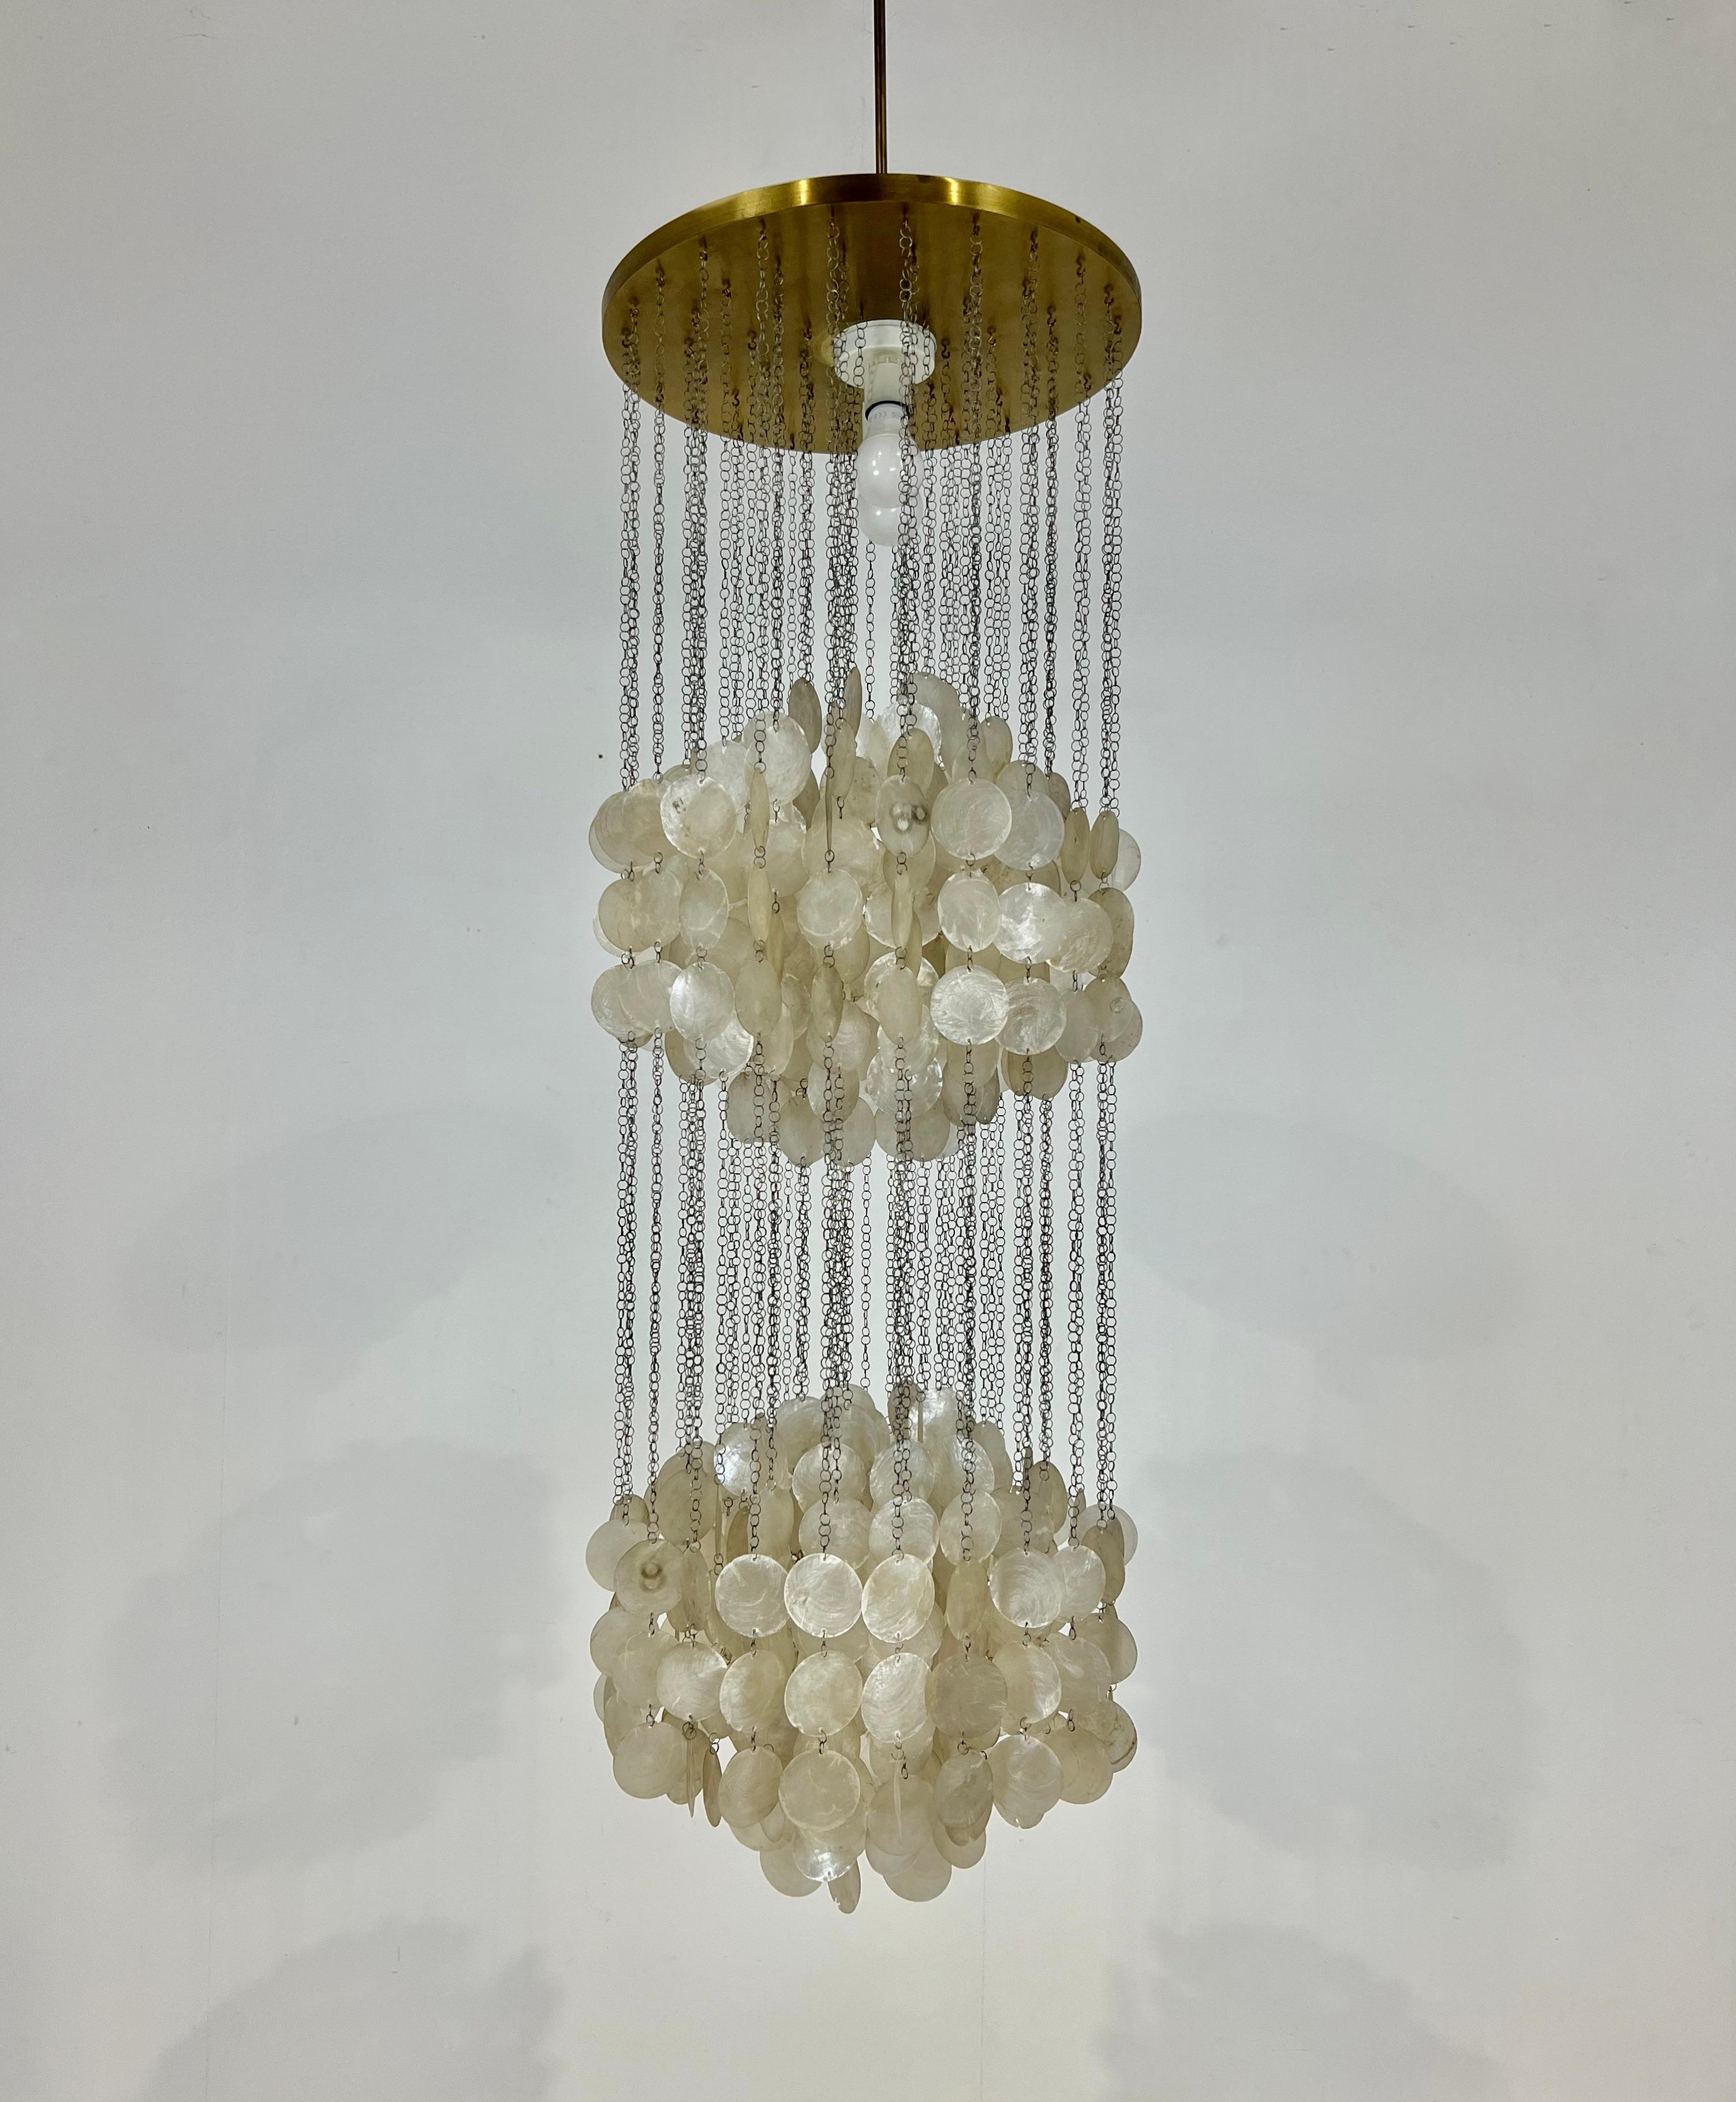 Mother of pearl and brass chandelier. 2 Points of light. Wear due to time and age of the chandelier.